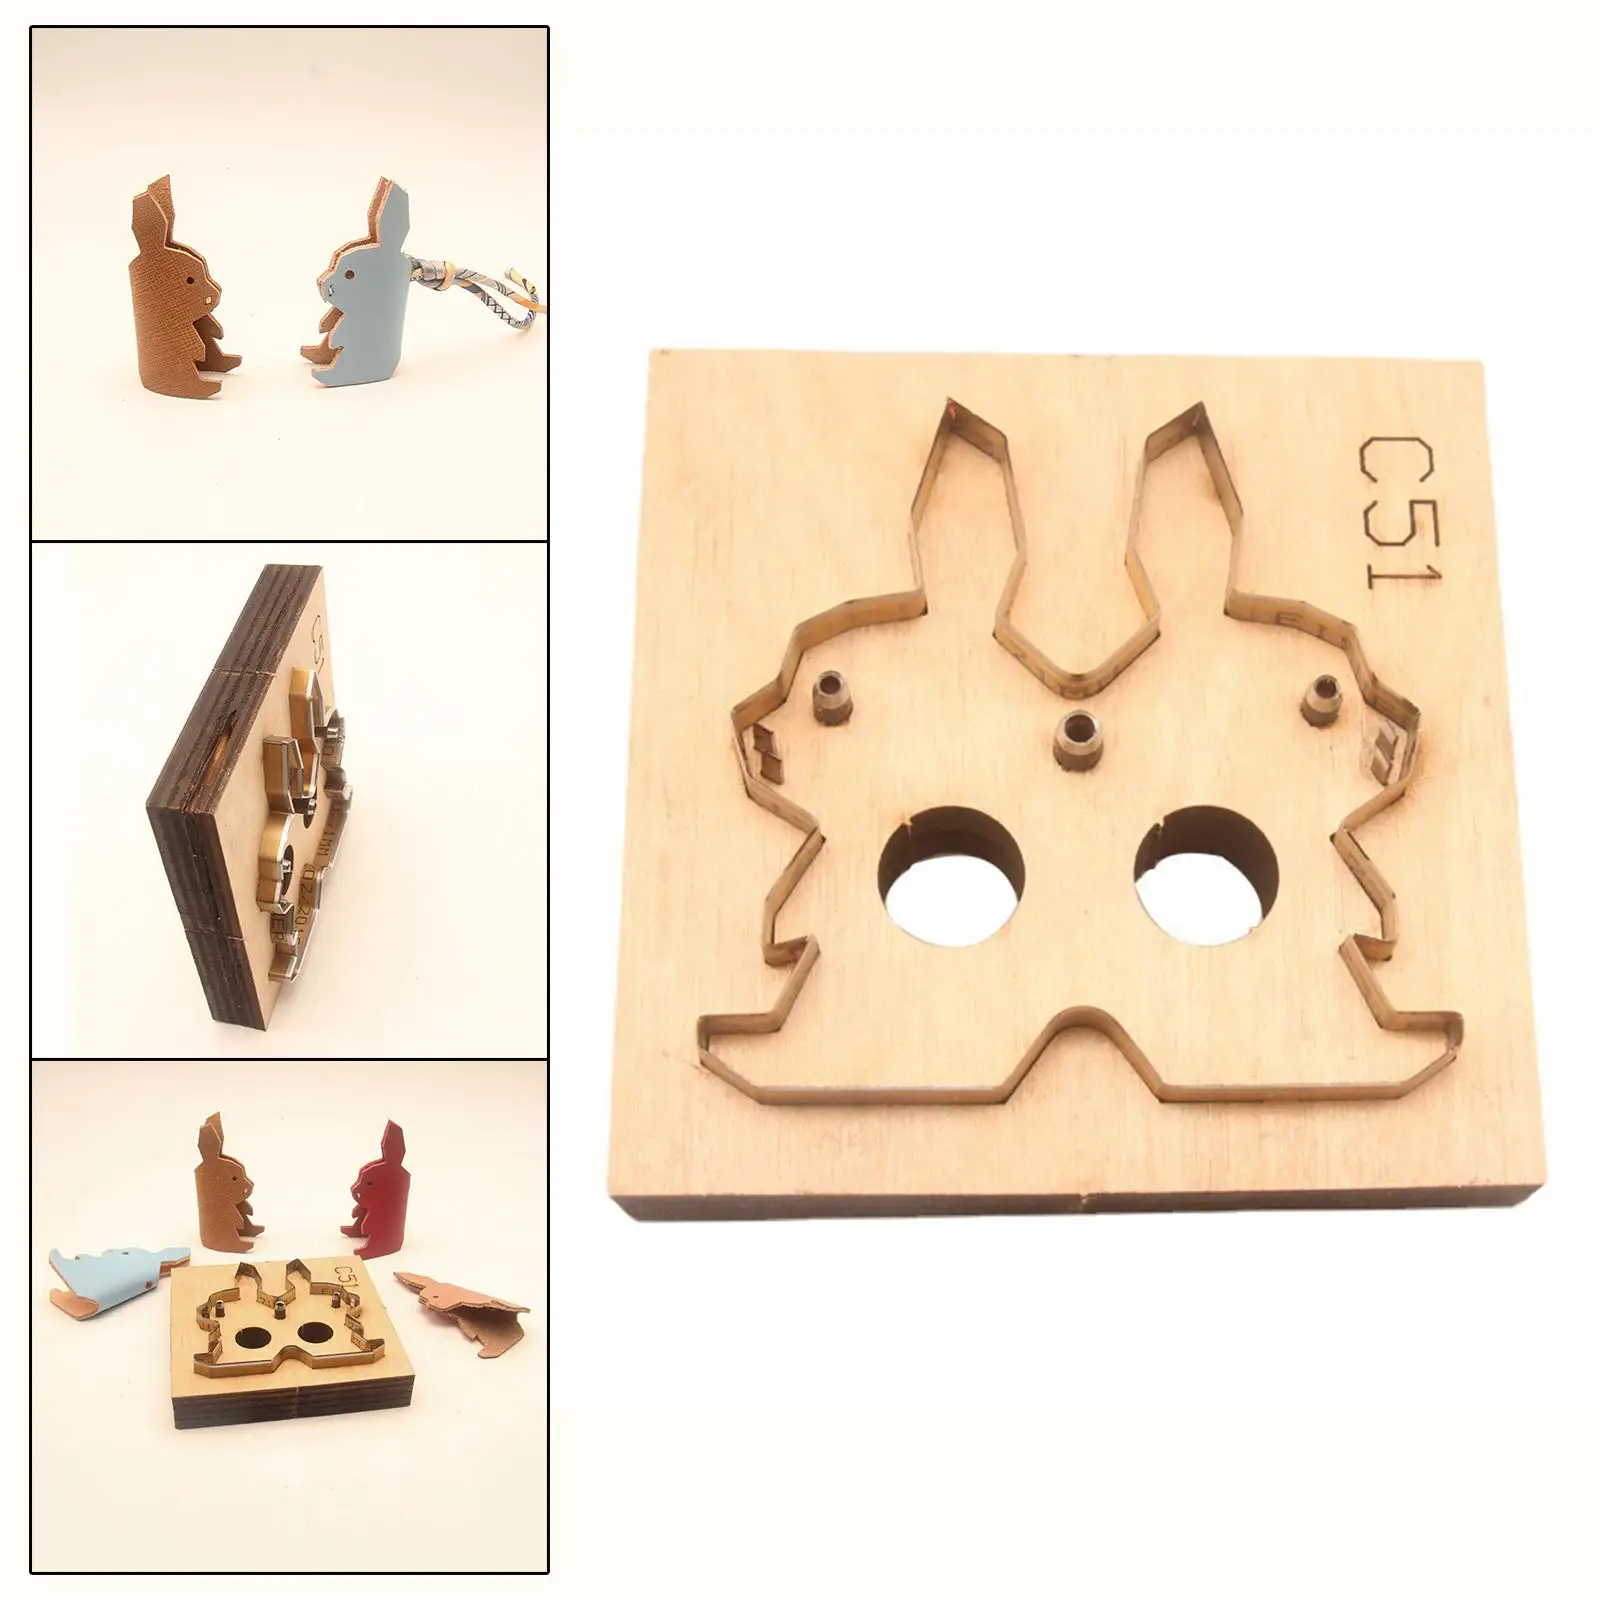 Leather Cutting Die Mold Portable Stable Multipurpose Practical Making Stencil Handmade for Househld Beginner Studio Accessories